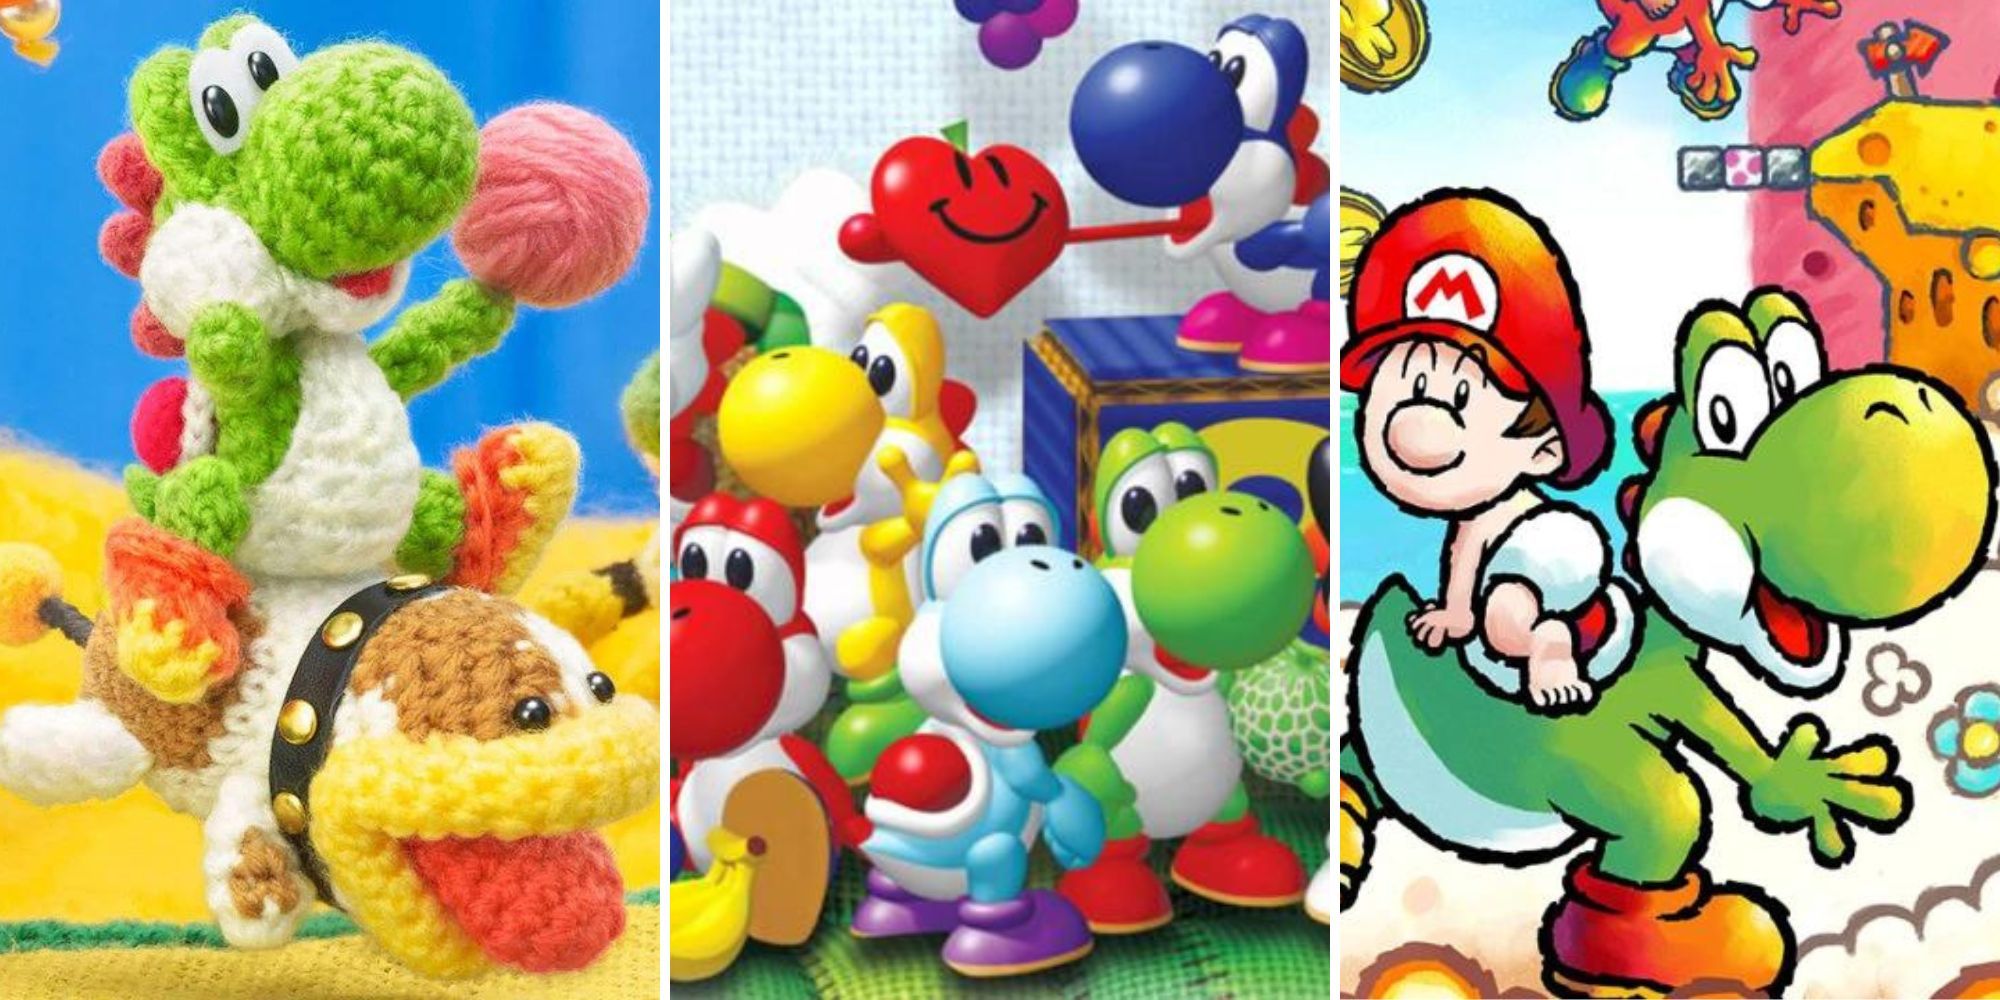 Yoshi rides Poochy, Colorful Yoshi's stand around, Yoshi with Baby Mario on his back